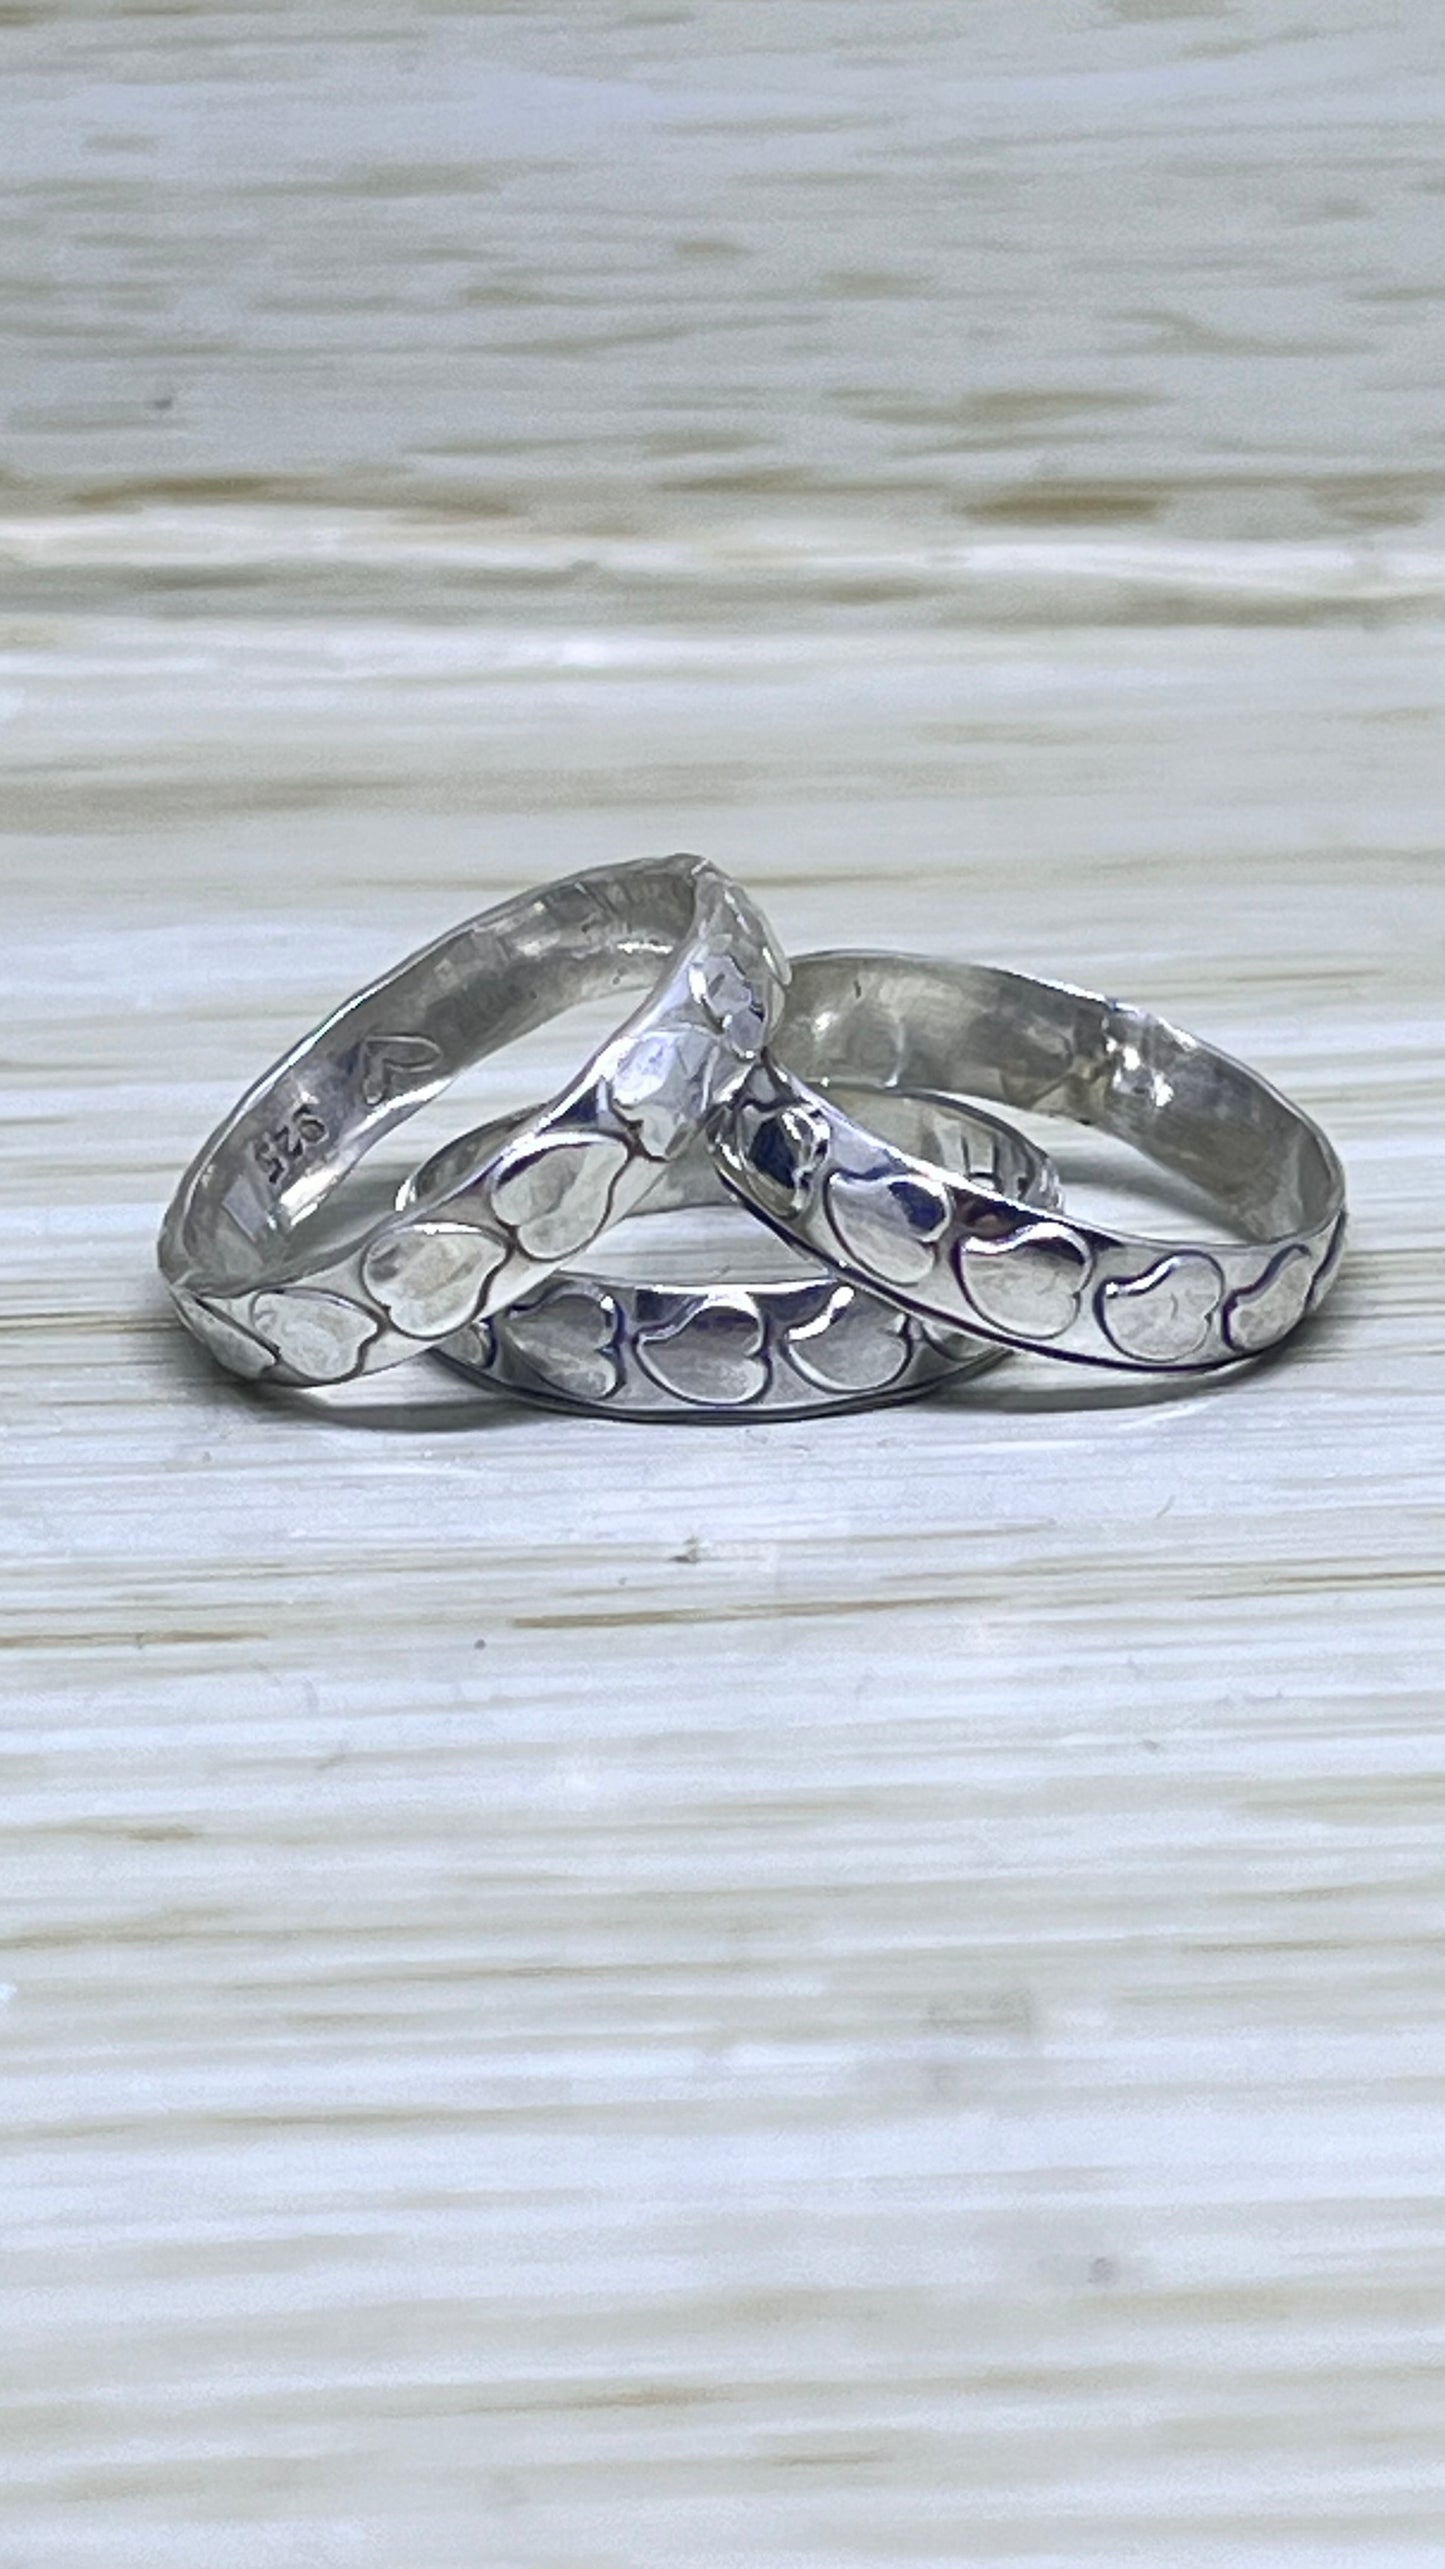 Assorted Silver Patterned Bands.